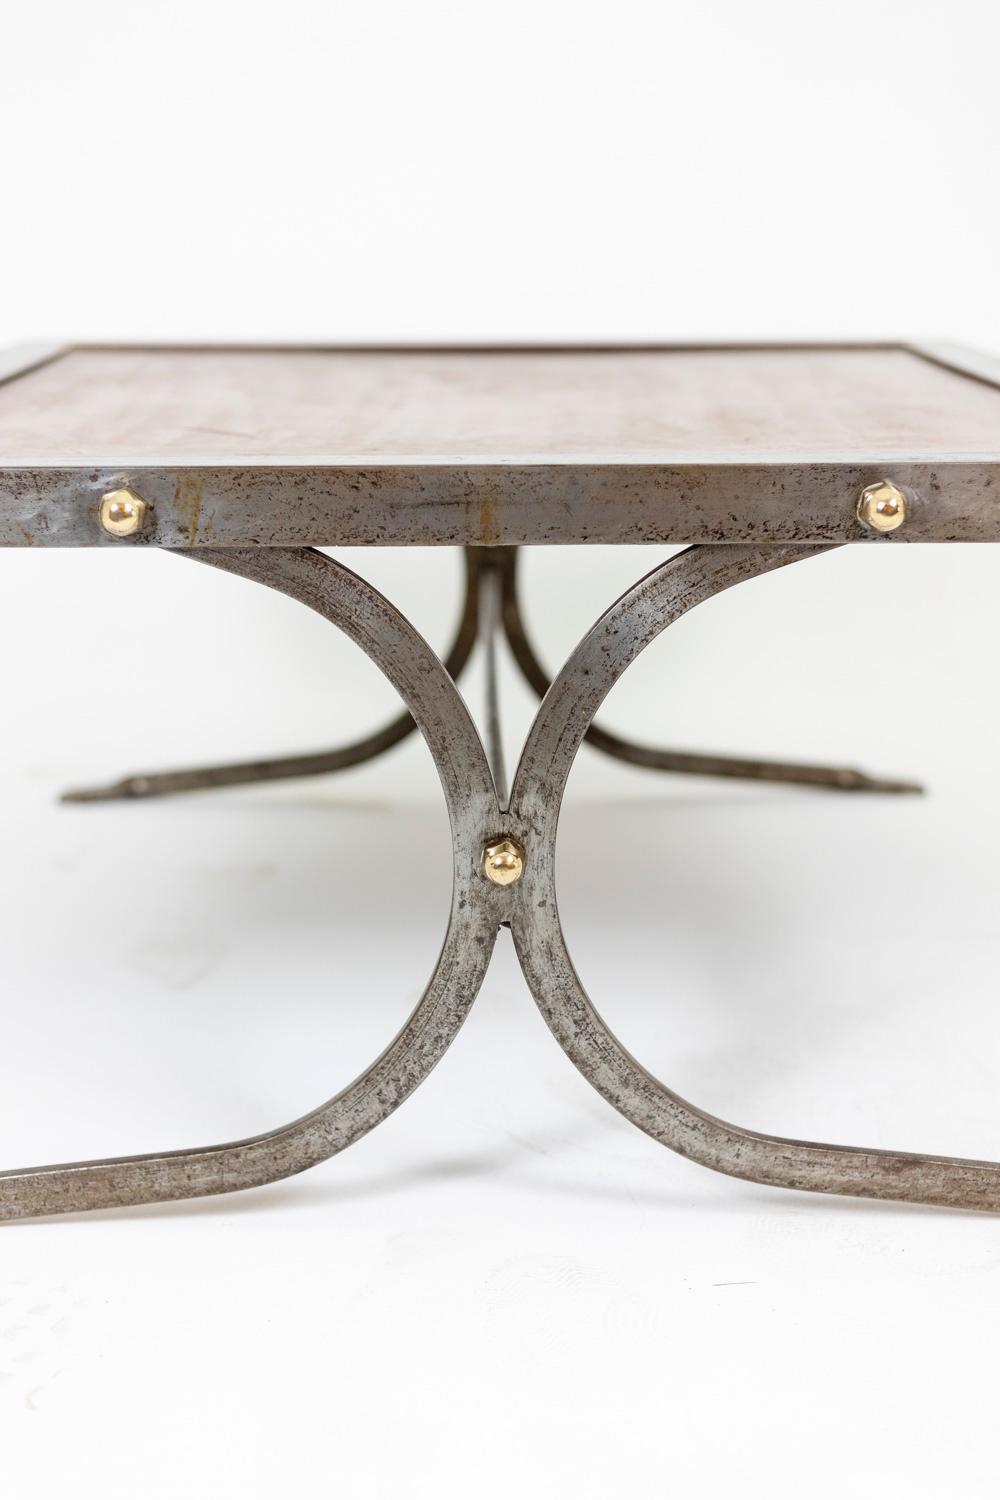 20th Century Industrial Style Coffee Table in Silver and Leather, 1970s For Sale